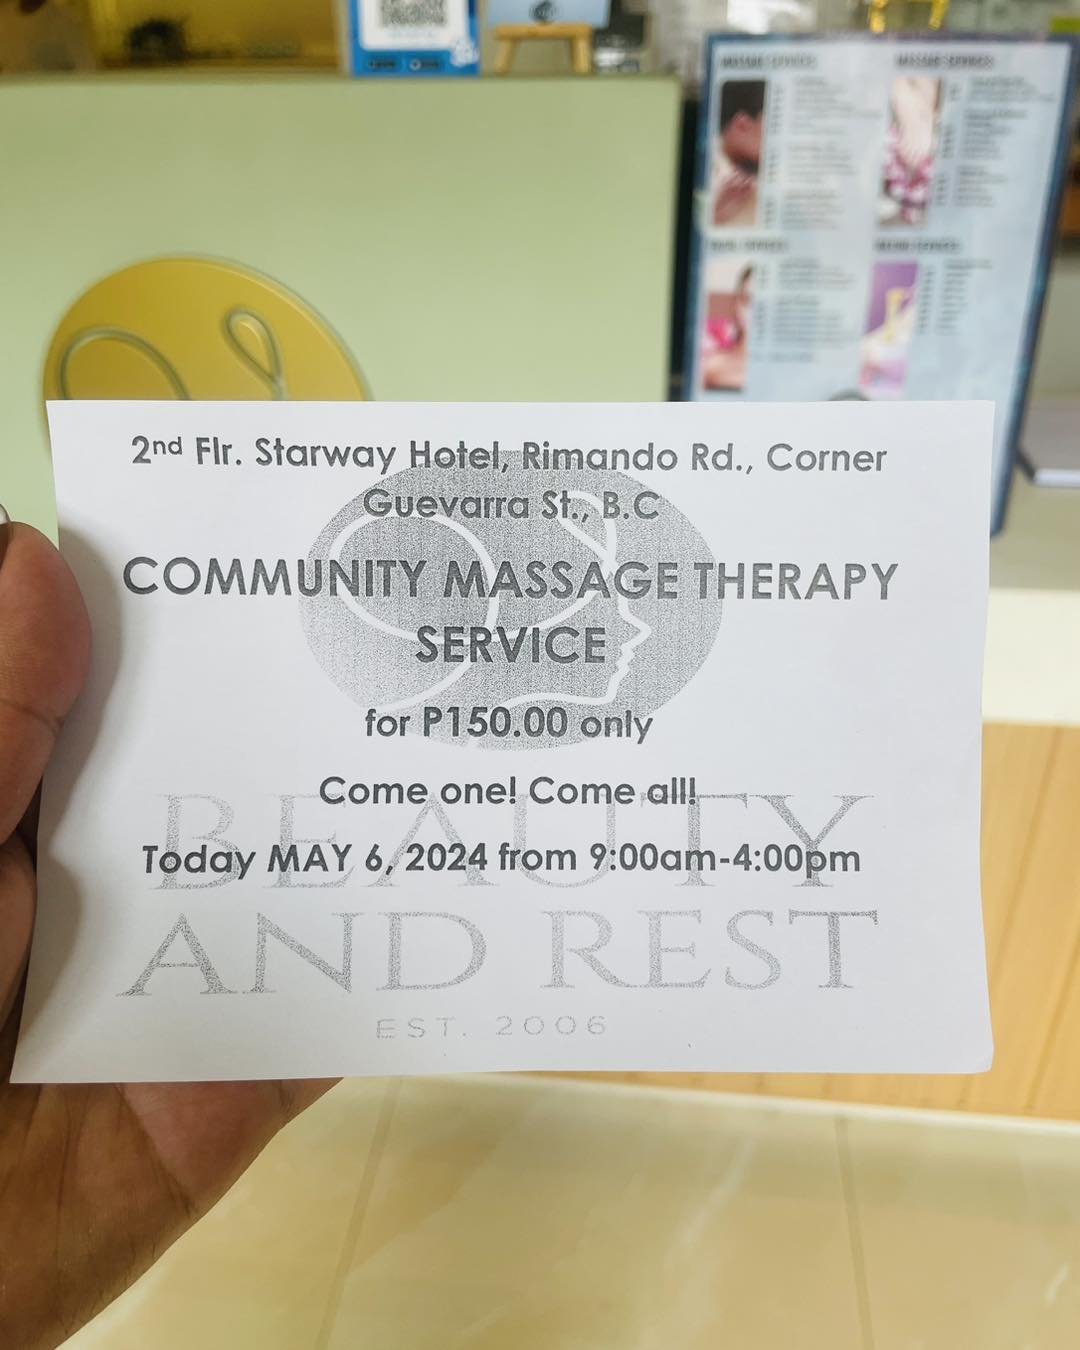 Community massage therapy service for only 150 🙂